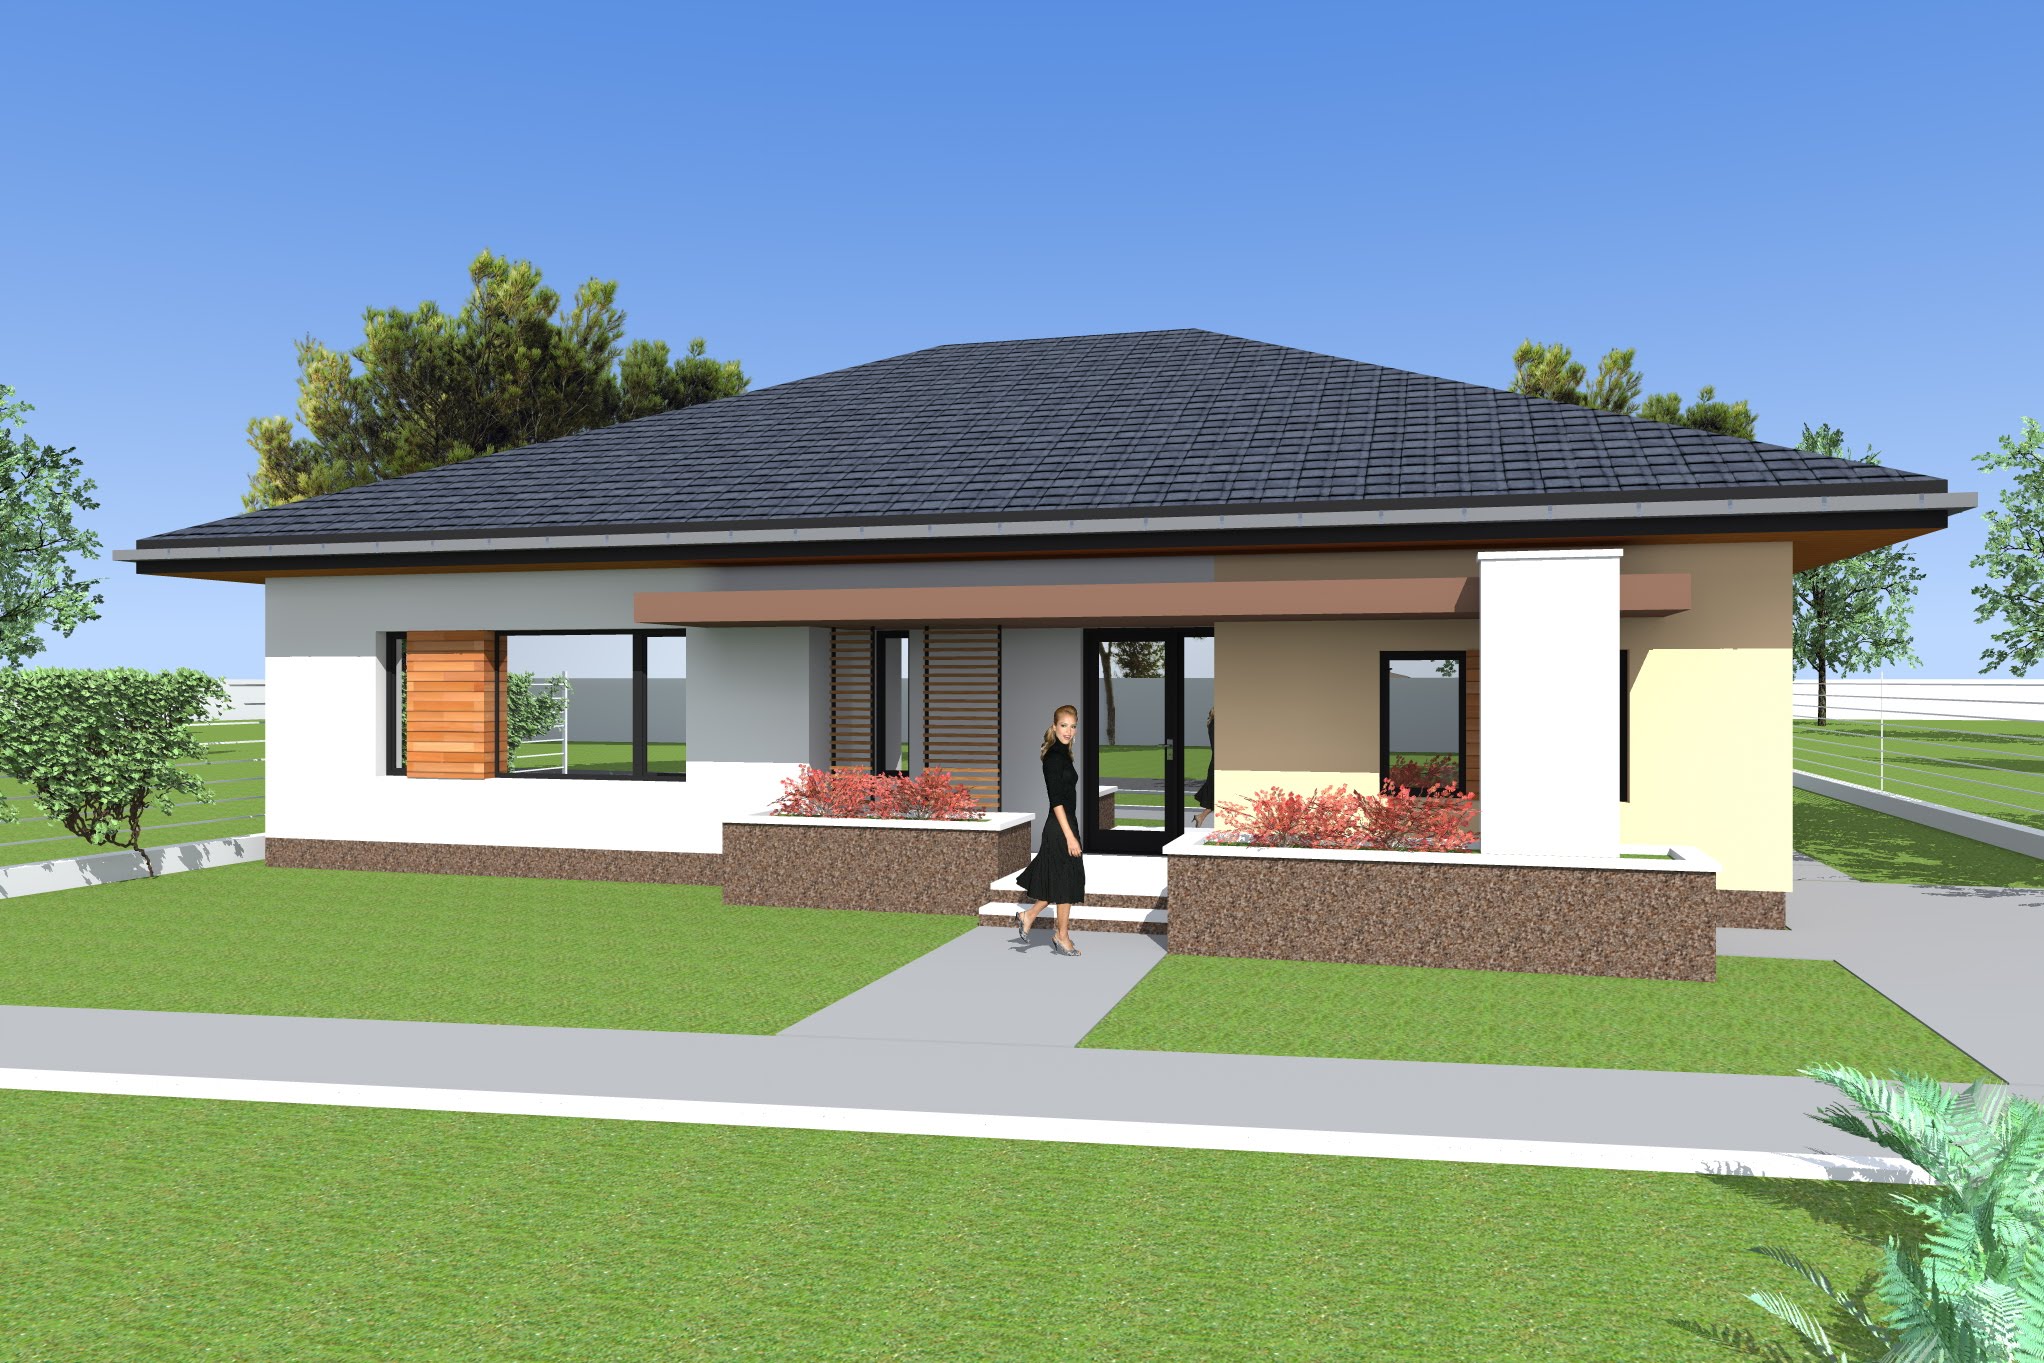 Three bedroom Bungalow design and 3d elevations. Single floor house ...